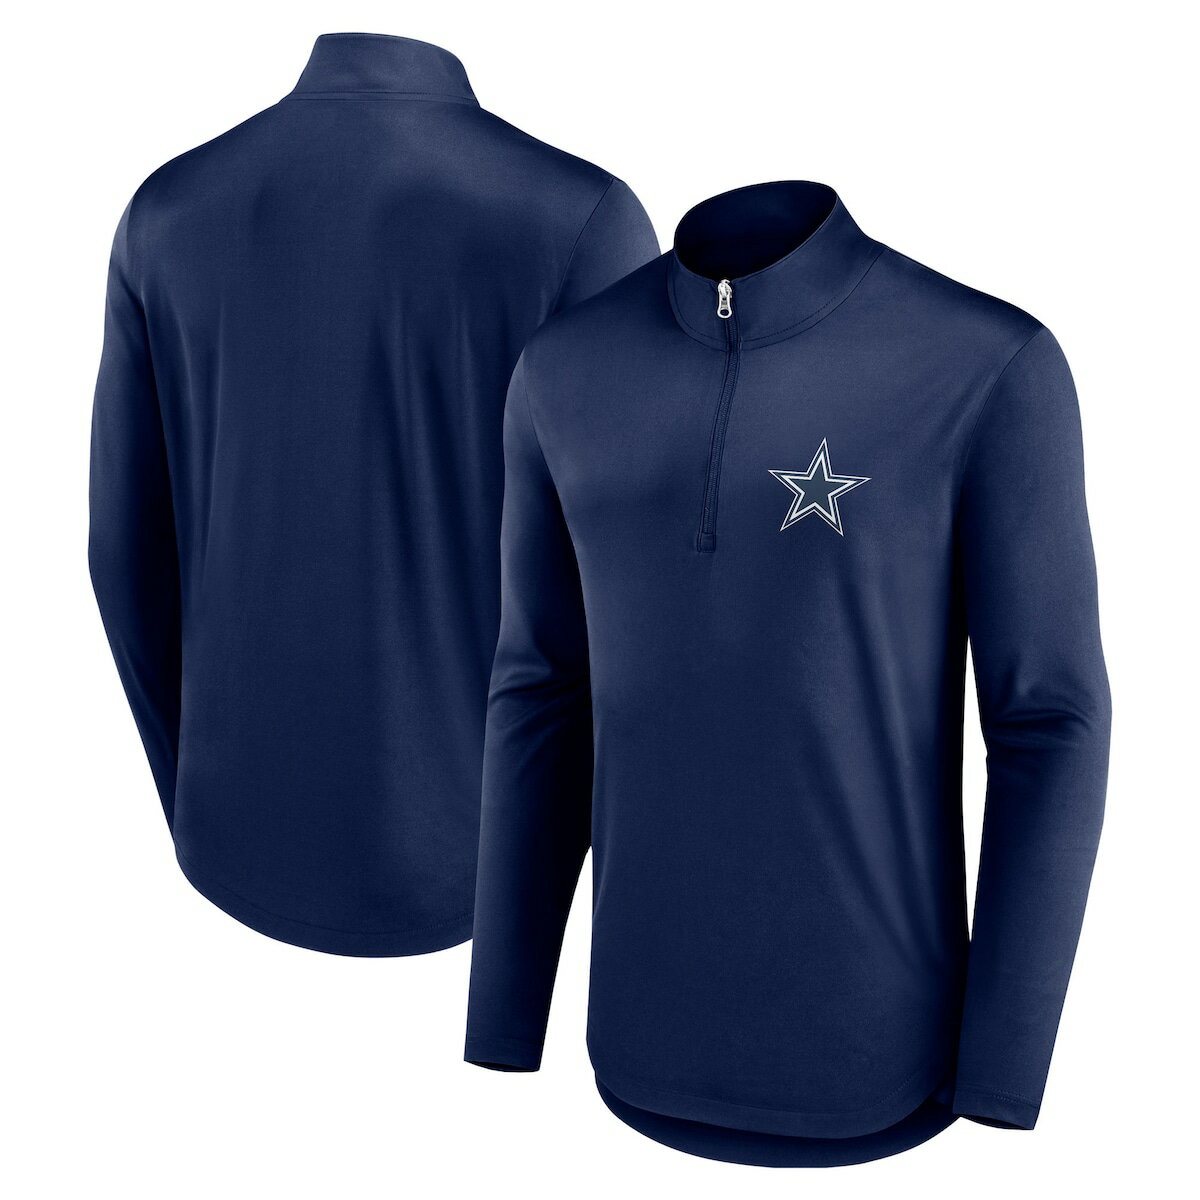 This Fanatics Branded Quarterback quarter-zip top is the perfect lightweight layer. It features signature Dallas Cowboys colors and graphics that create a fan-forward look. A mock neck supplies extra coverage in case temperatures decrease.Long sleeveImportedBrand: Fanatics BrandedMachine wash, tumble dry lowOfficially licensed1/4-ZipLightweight top suitable for mild temperaturesMaterial: 100% PolyesterMock neckRounded droptail hemScreen print graphics